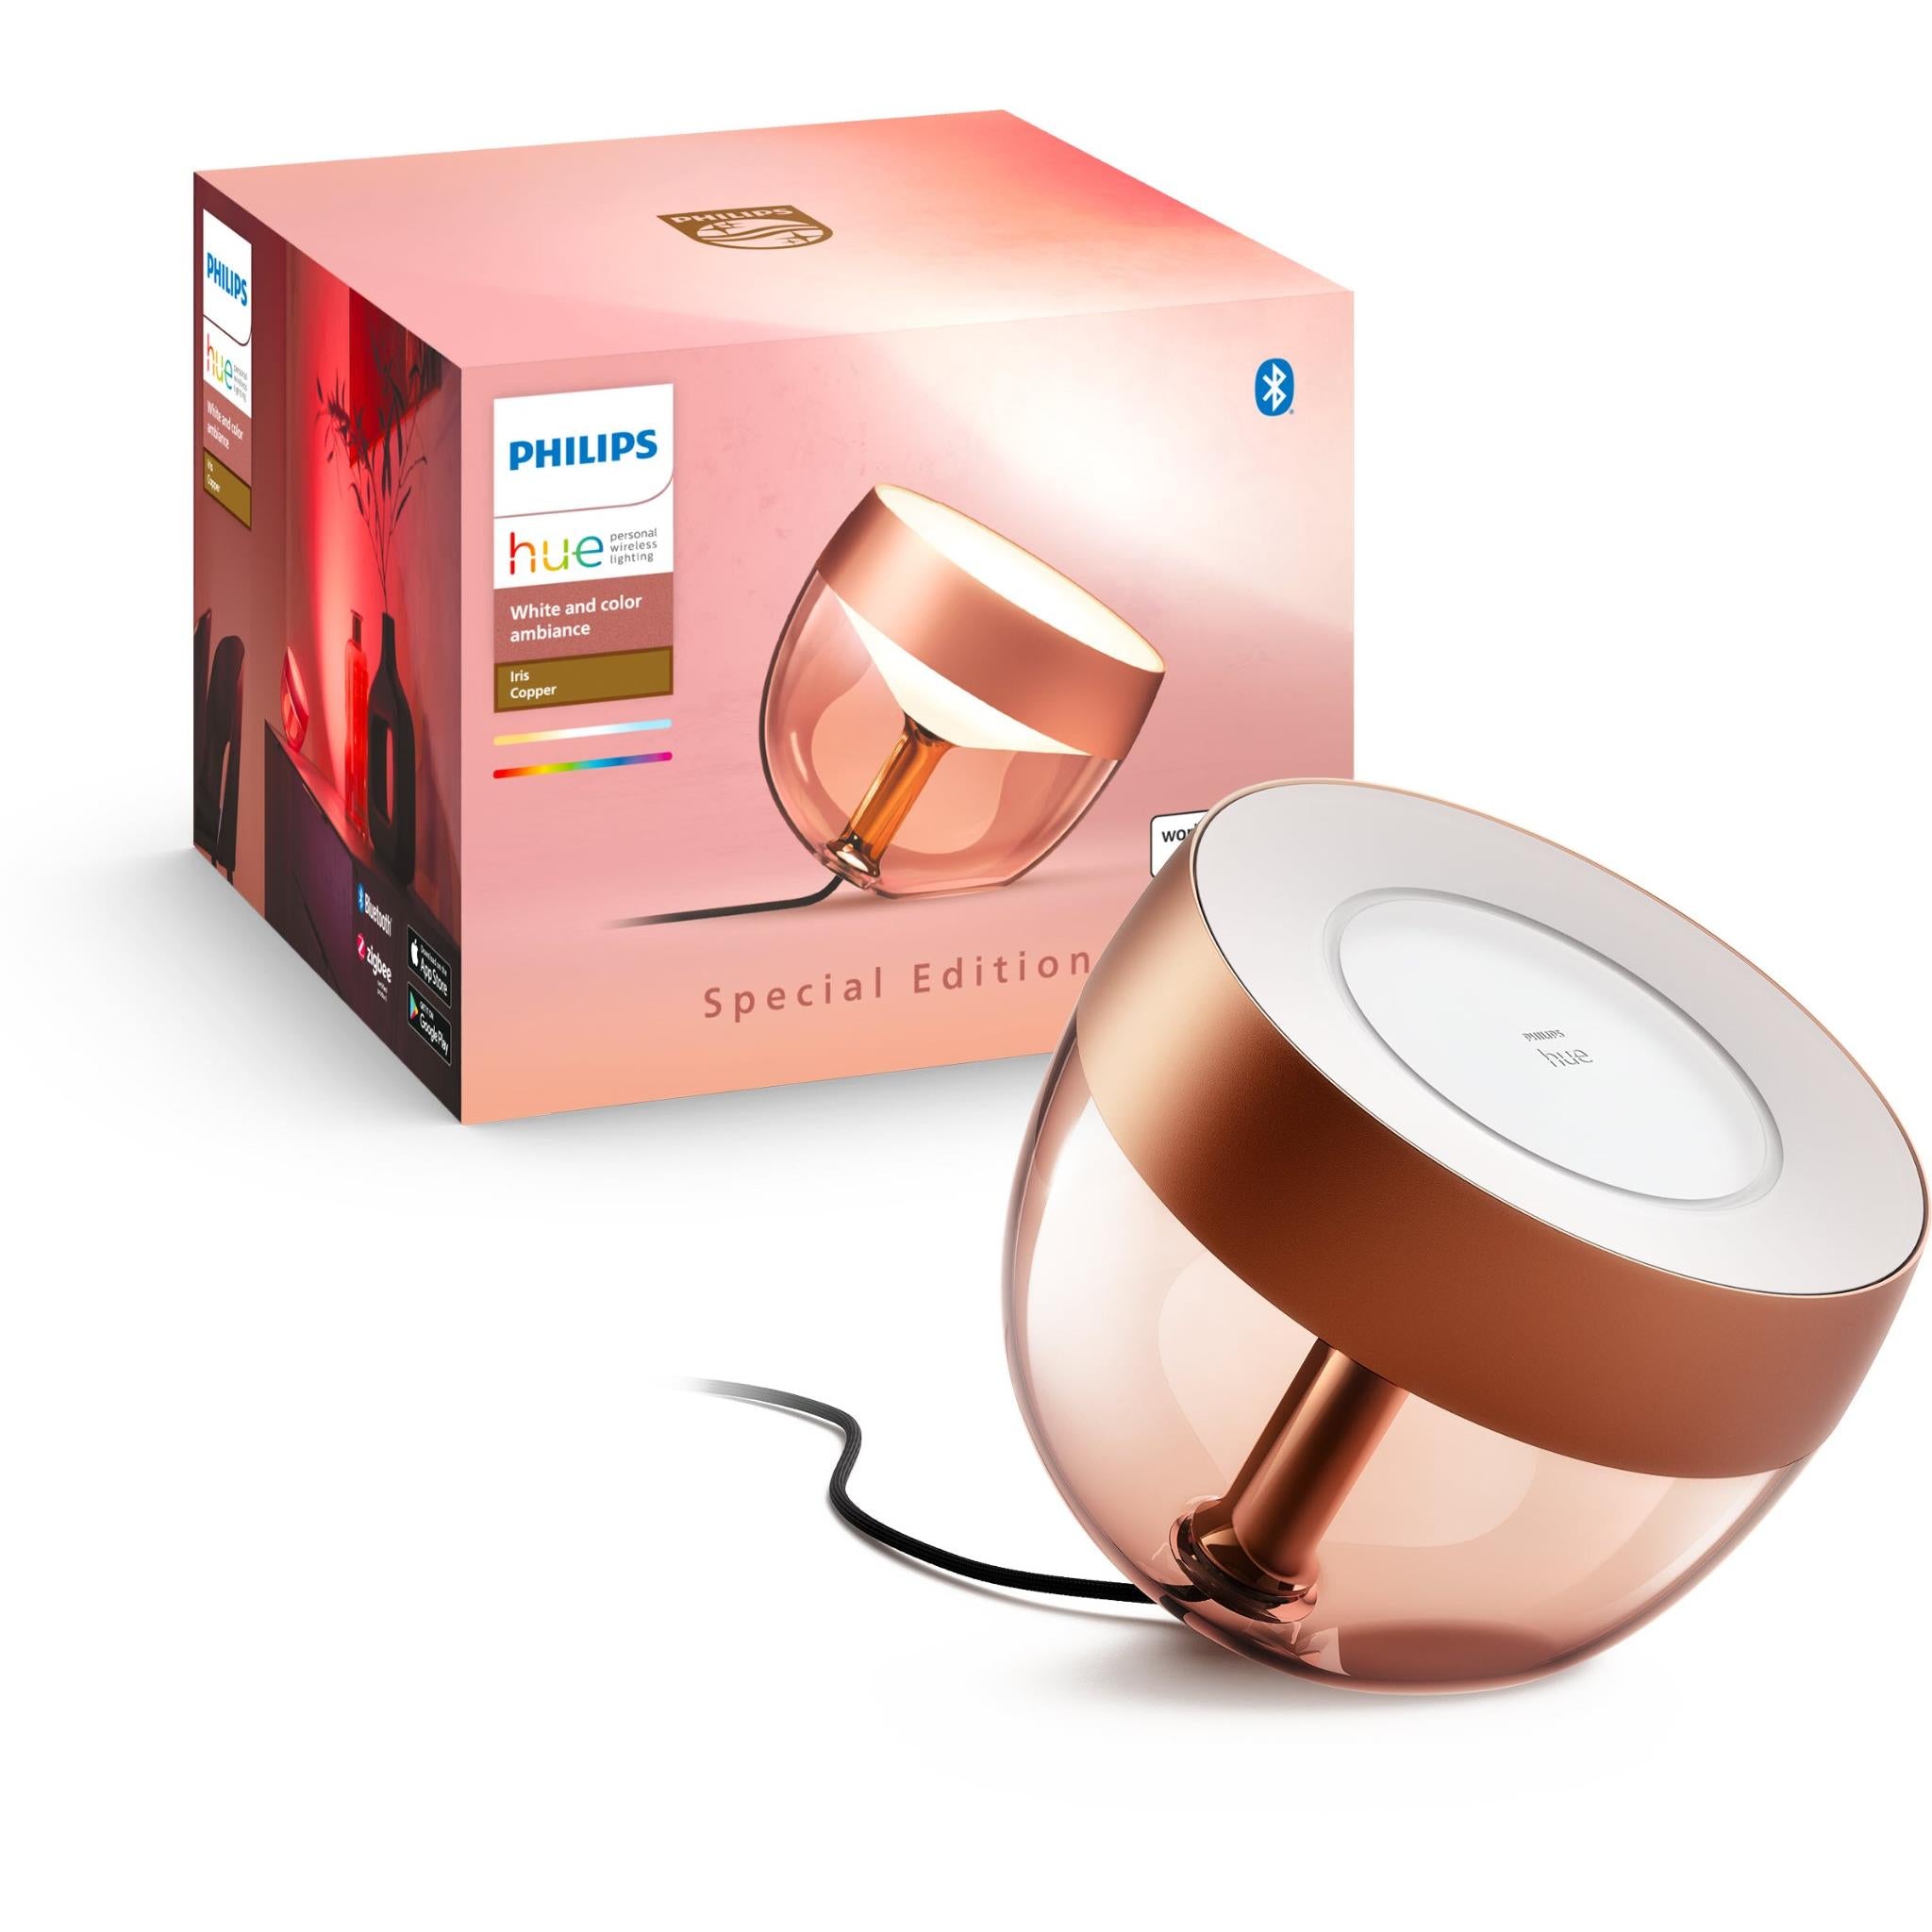 philips hue iris special edition copper